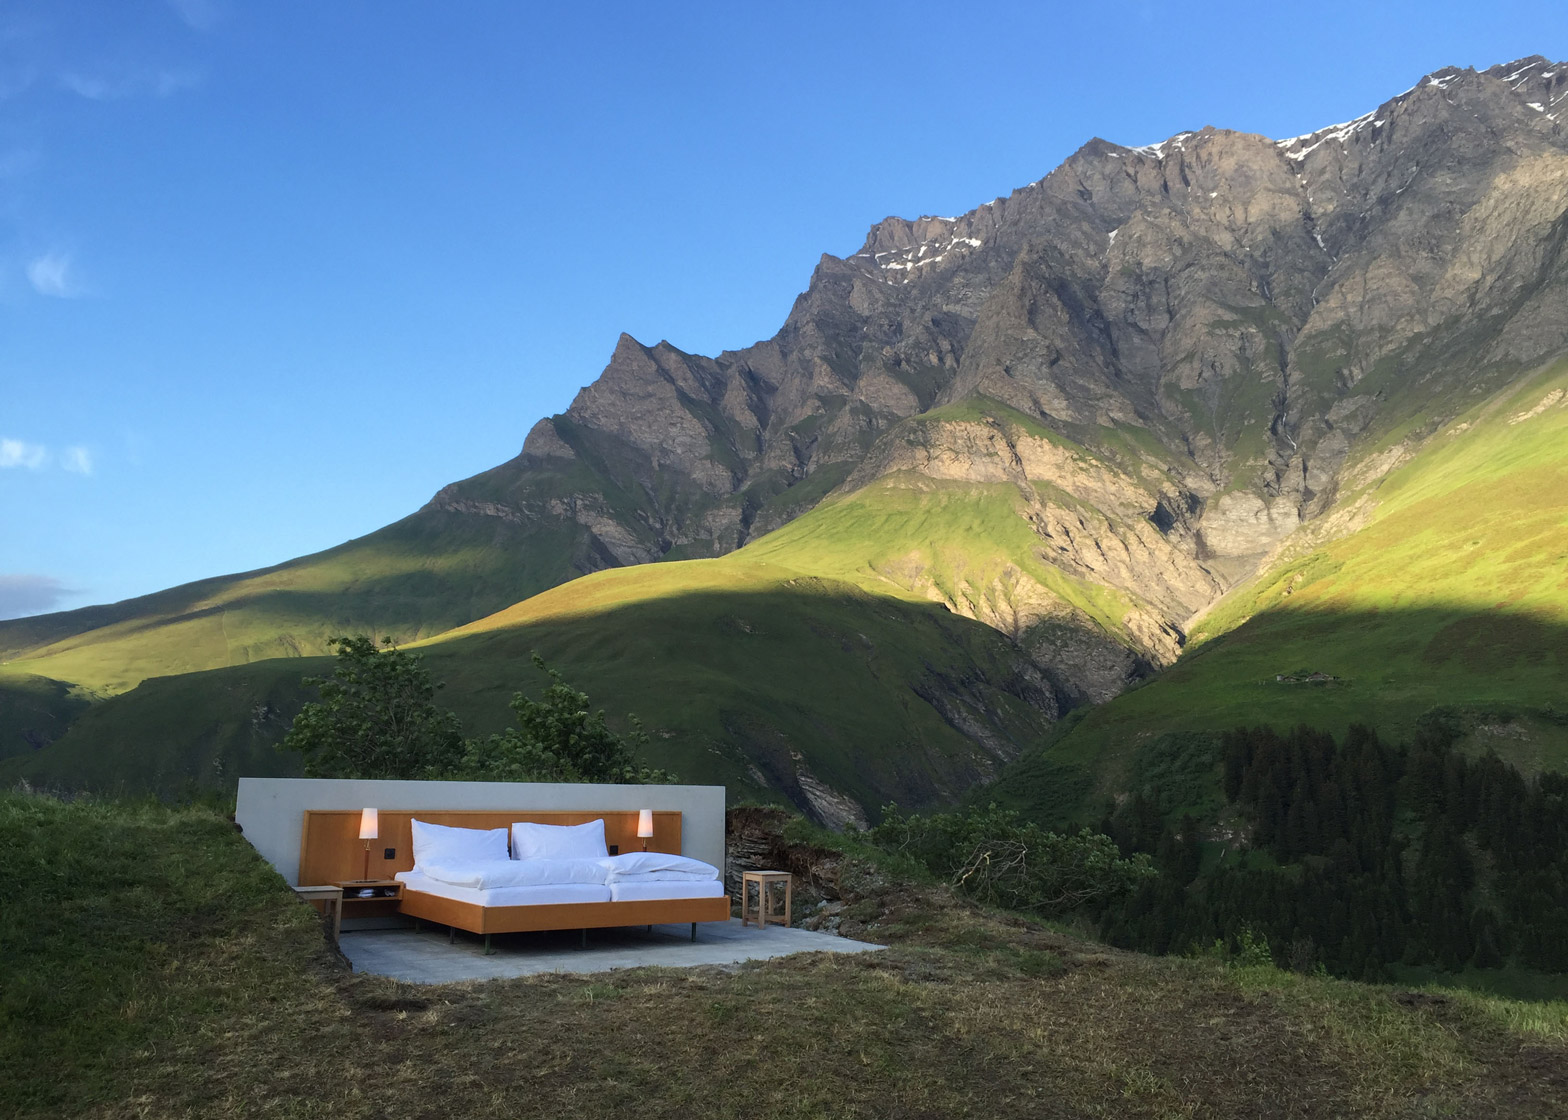  Null Stern's hotel with no walls allows panoramic views of the Swiss Alps 
 

Guests are invited to sleep under the stars in this open-air h